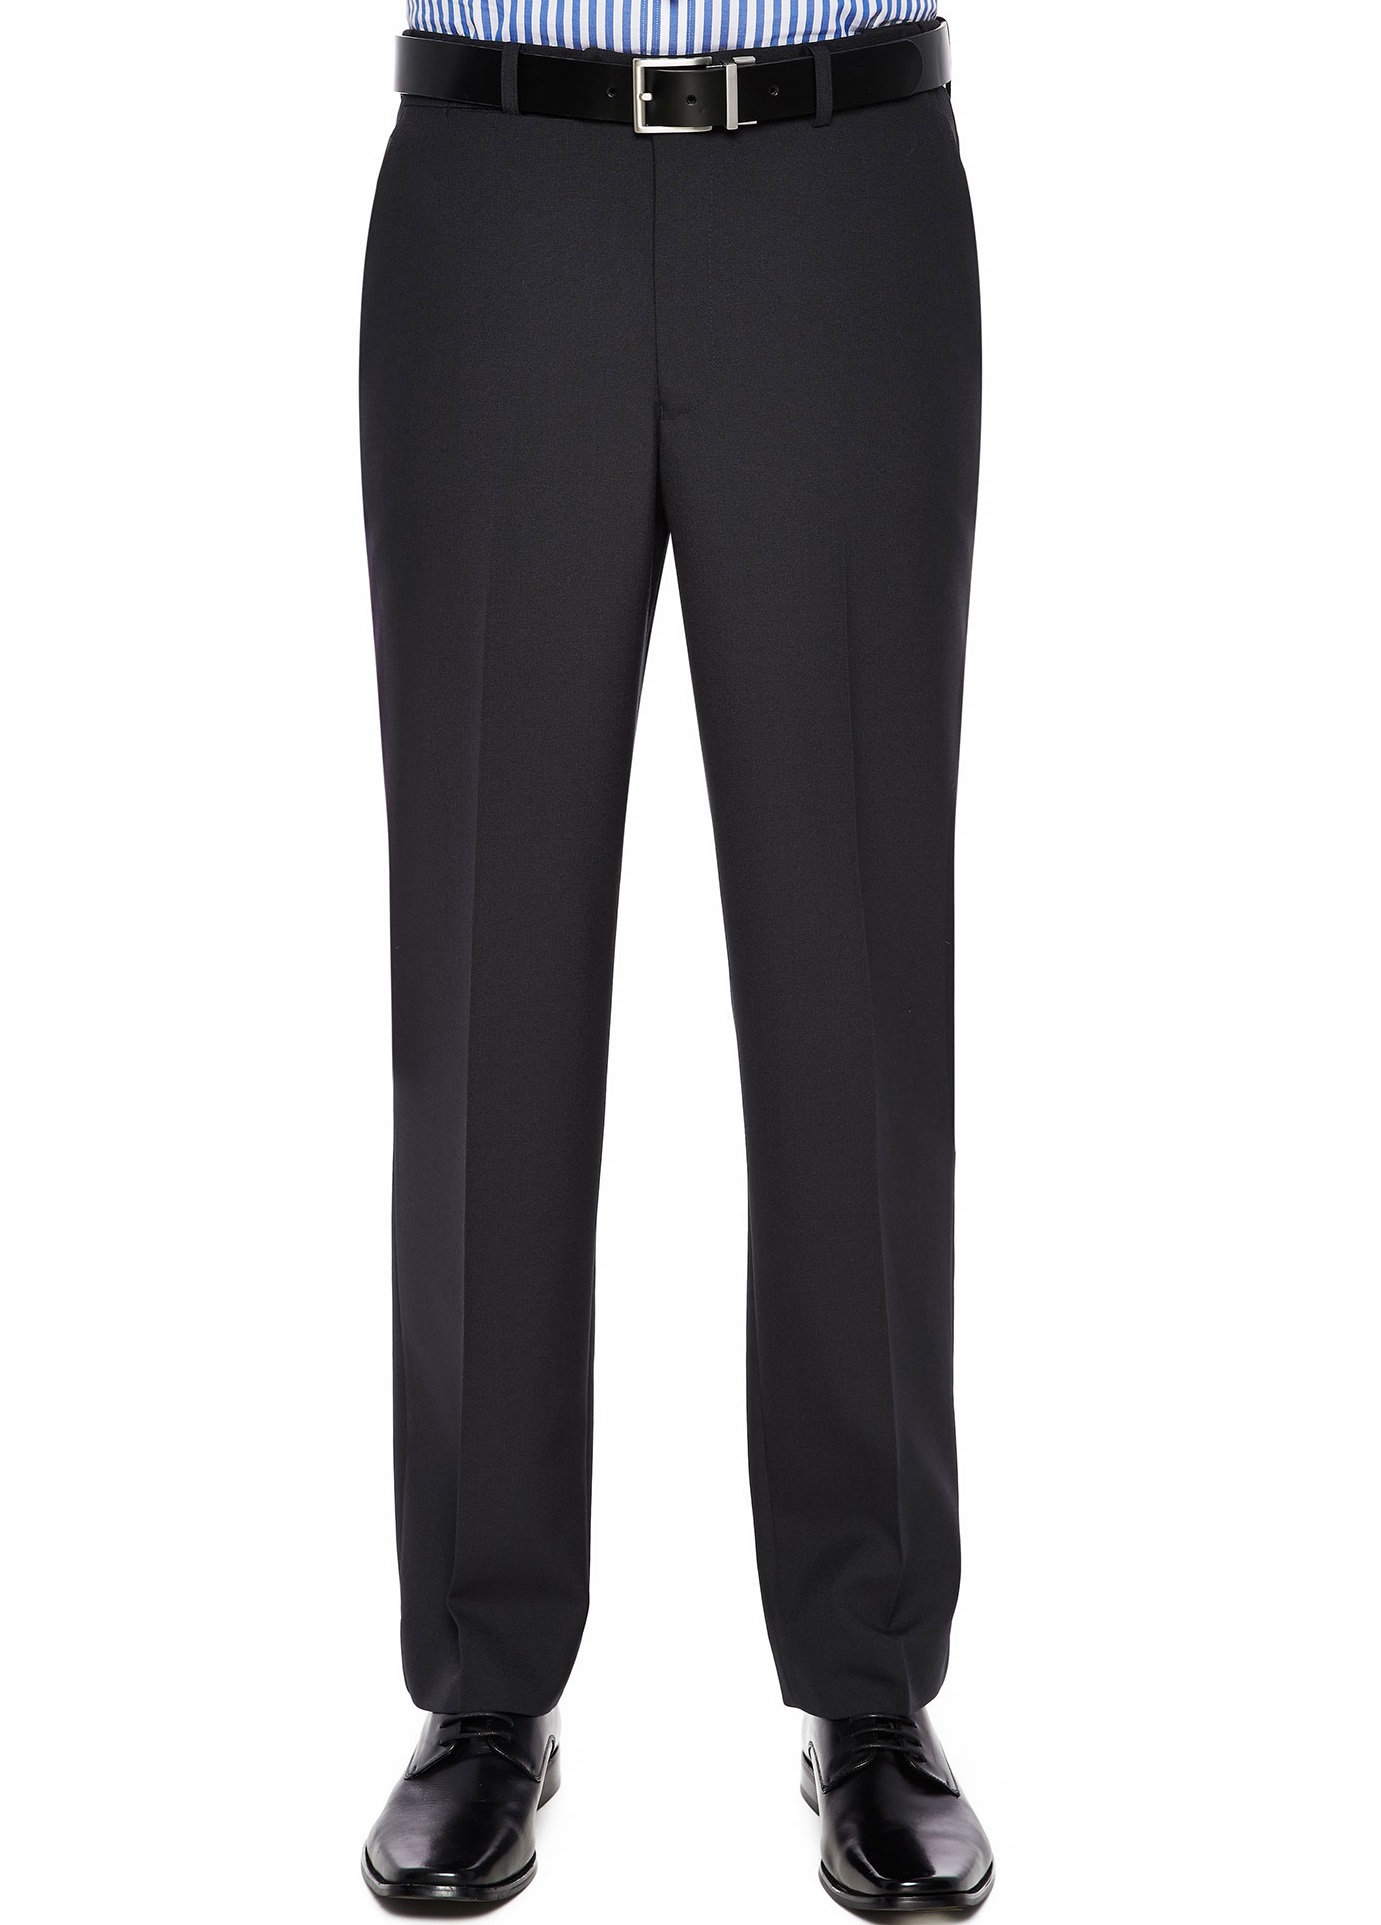 City Club Trousers Durable Wool Blend Classic Fit Buy Online